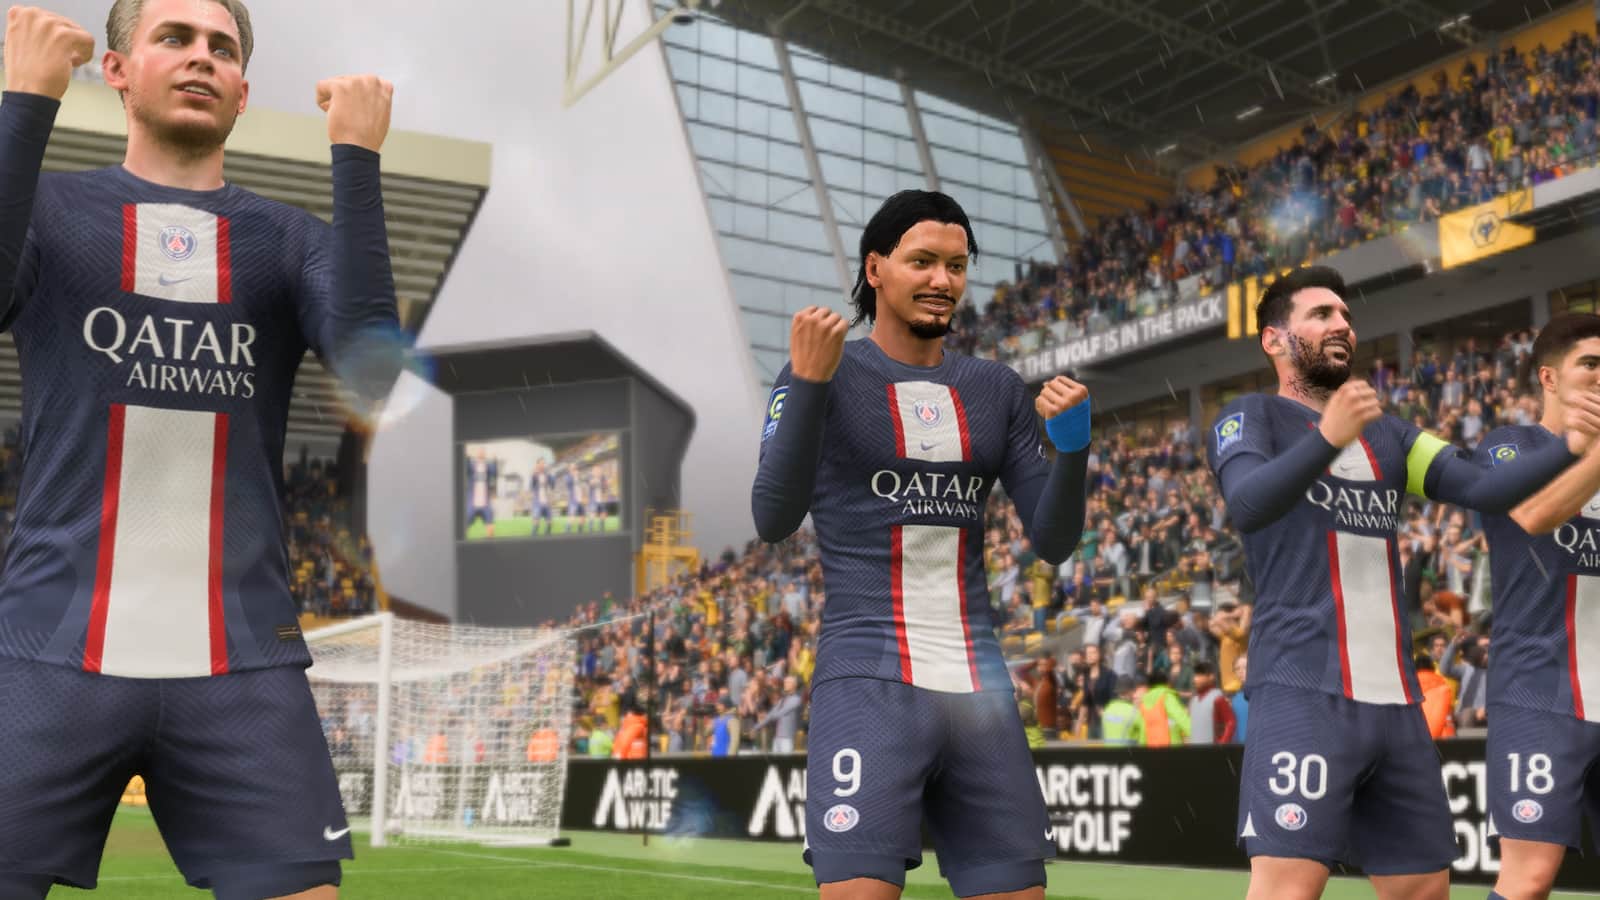 FIFA 18 Ultimate Team tips  Your guide to earning more coins and